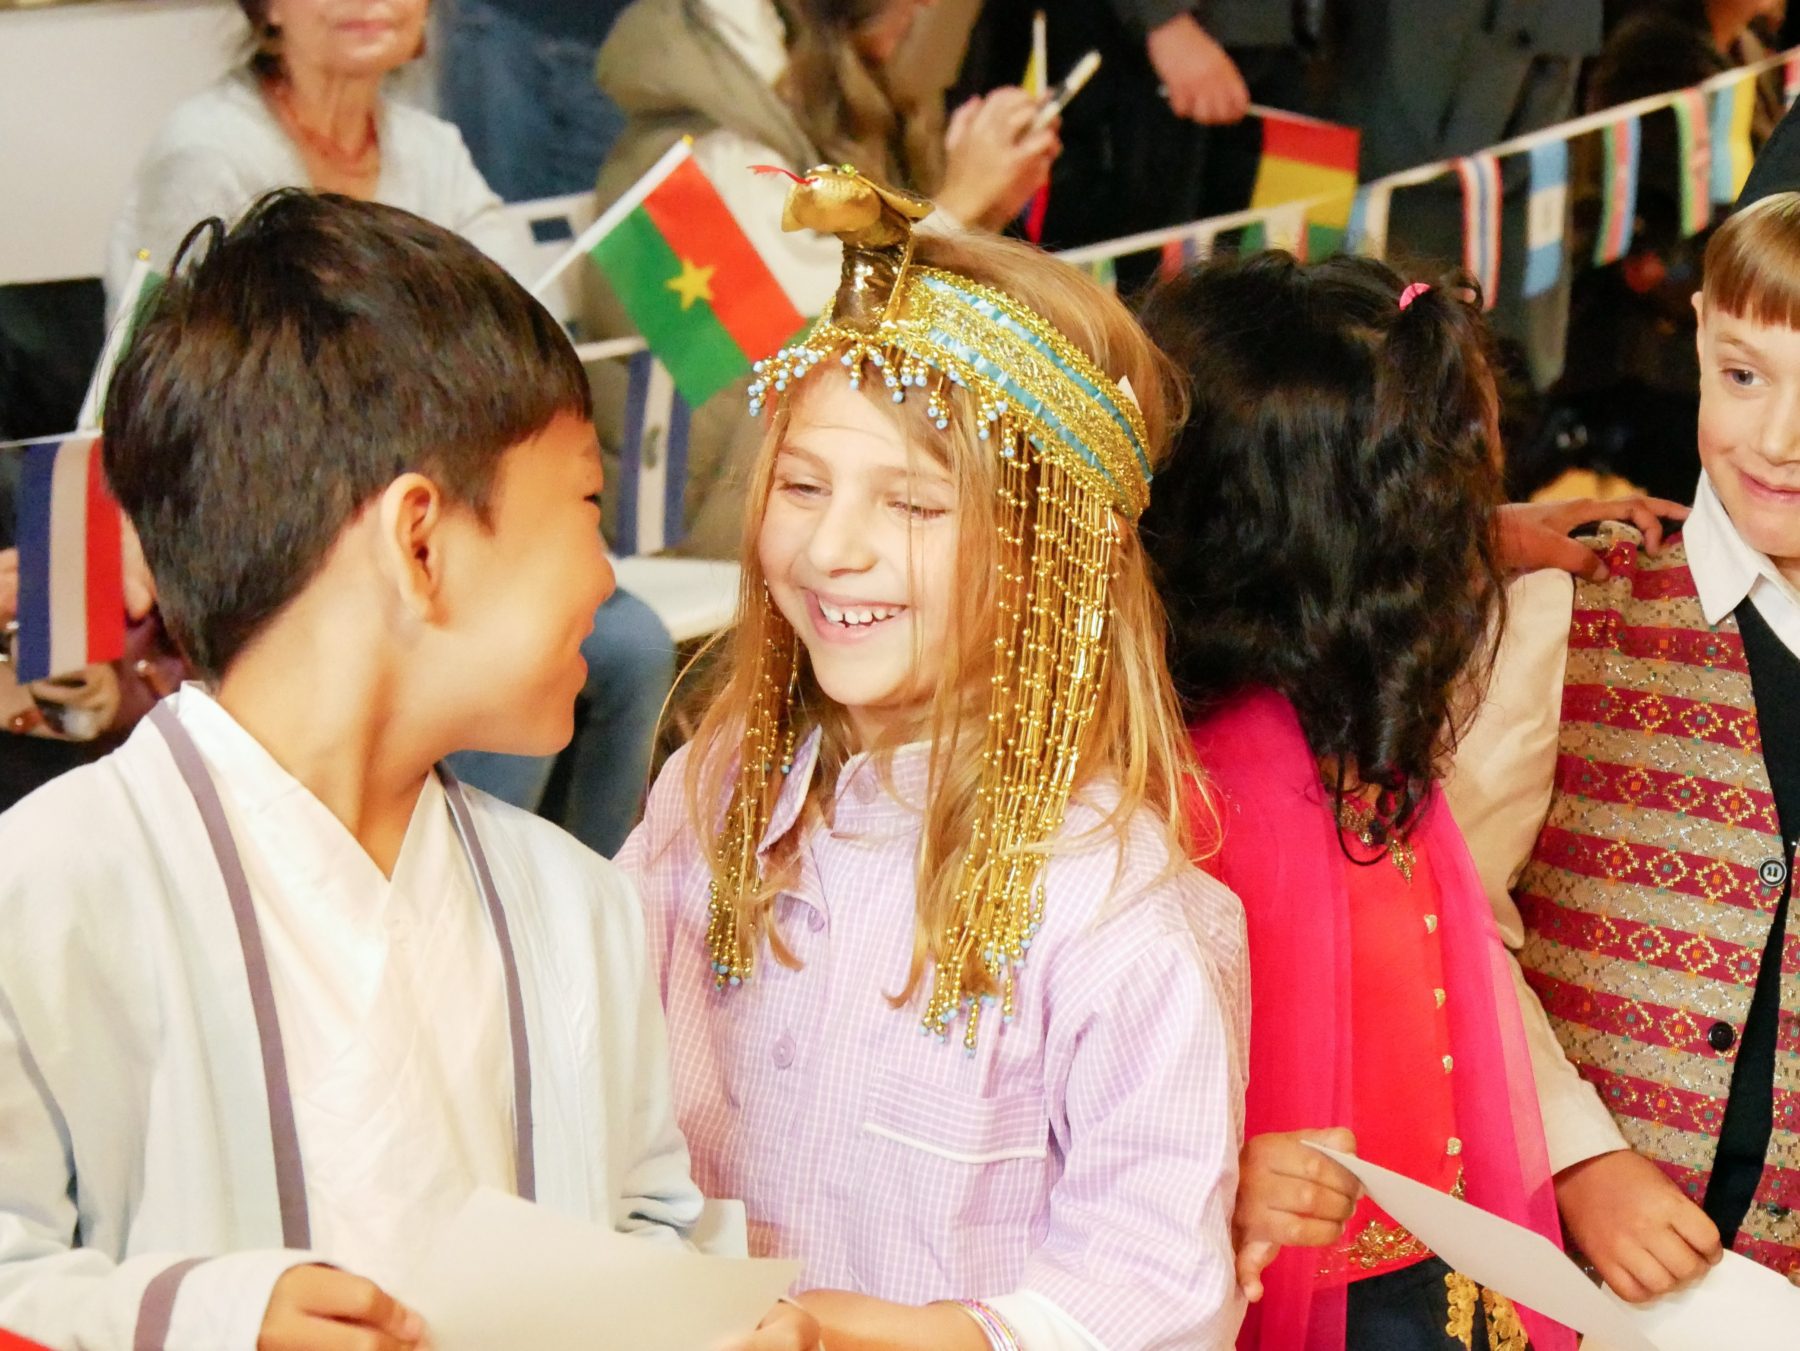 A line of students learning an international school curriculum dressed in cultural attire speaking to each other at a cultural event.